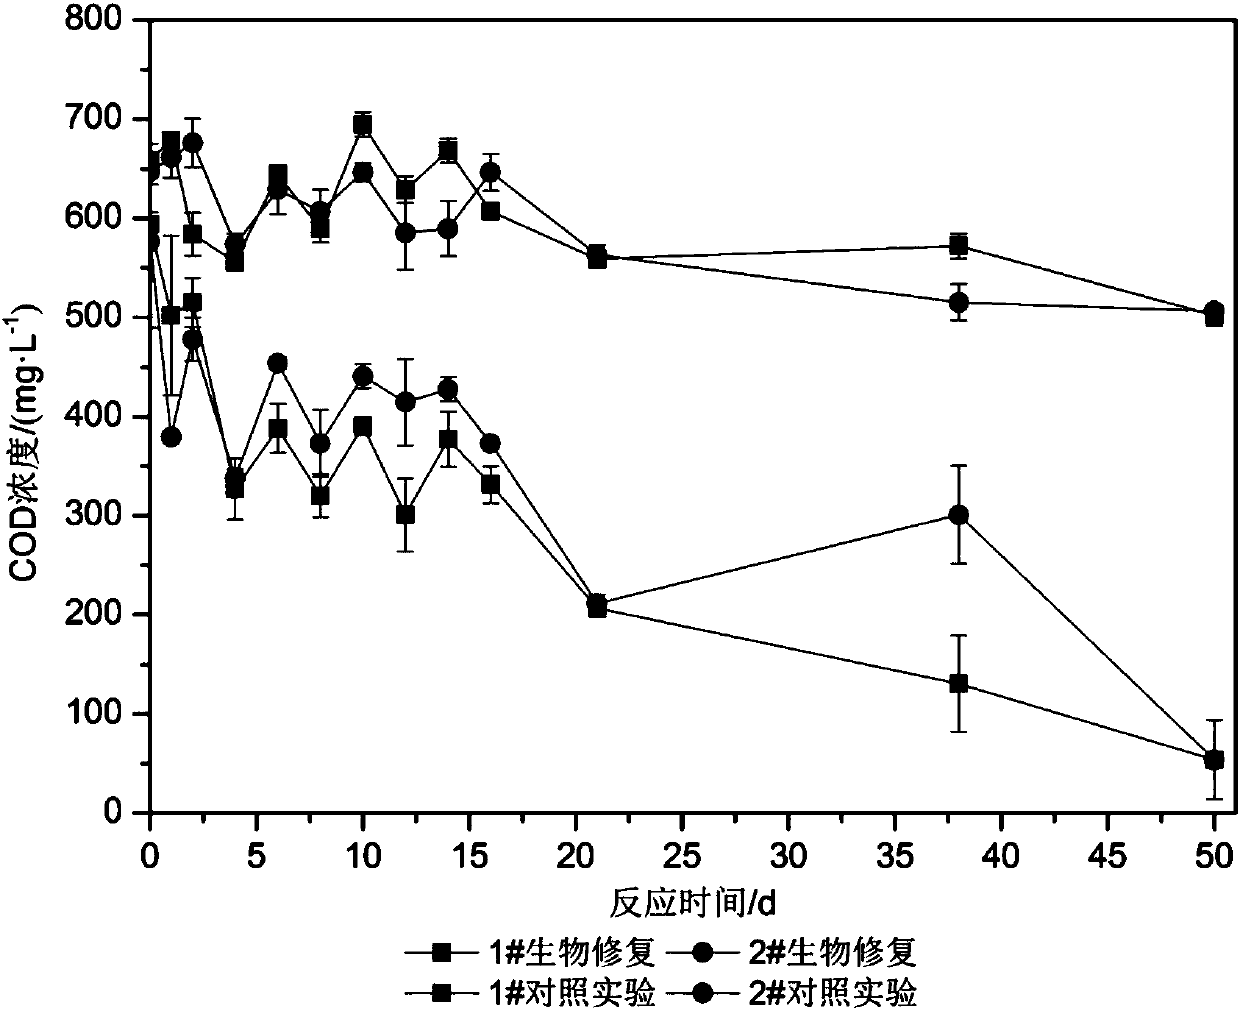 Anaerobic biological oxidation water pollution remediation method with Fe3+ in hematite as electron acceptor